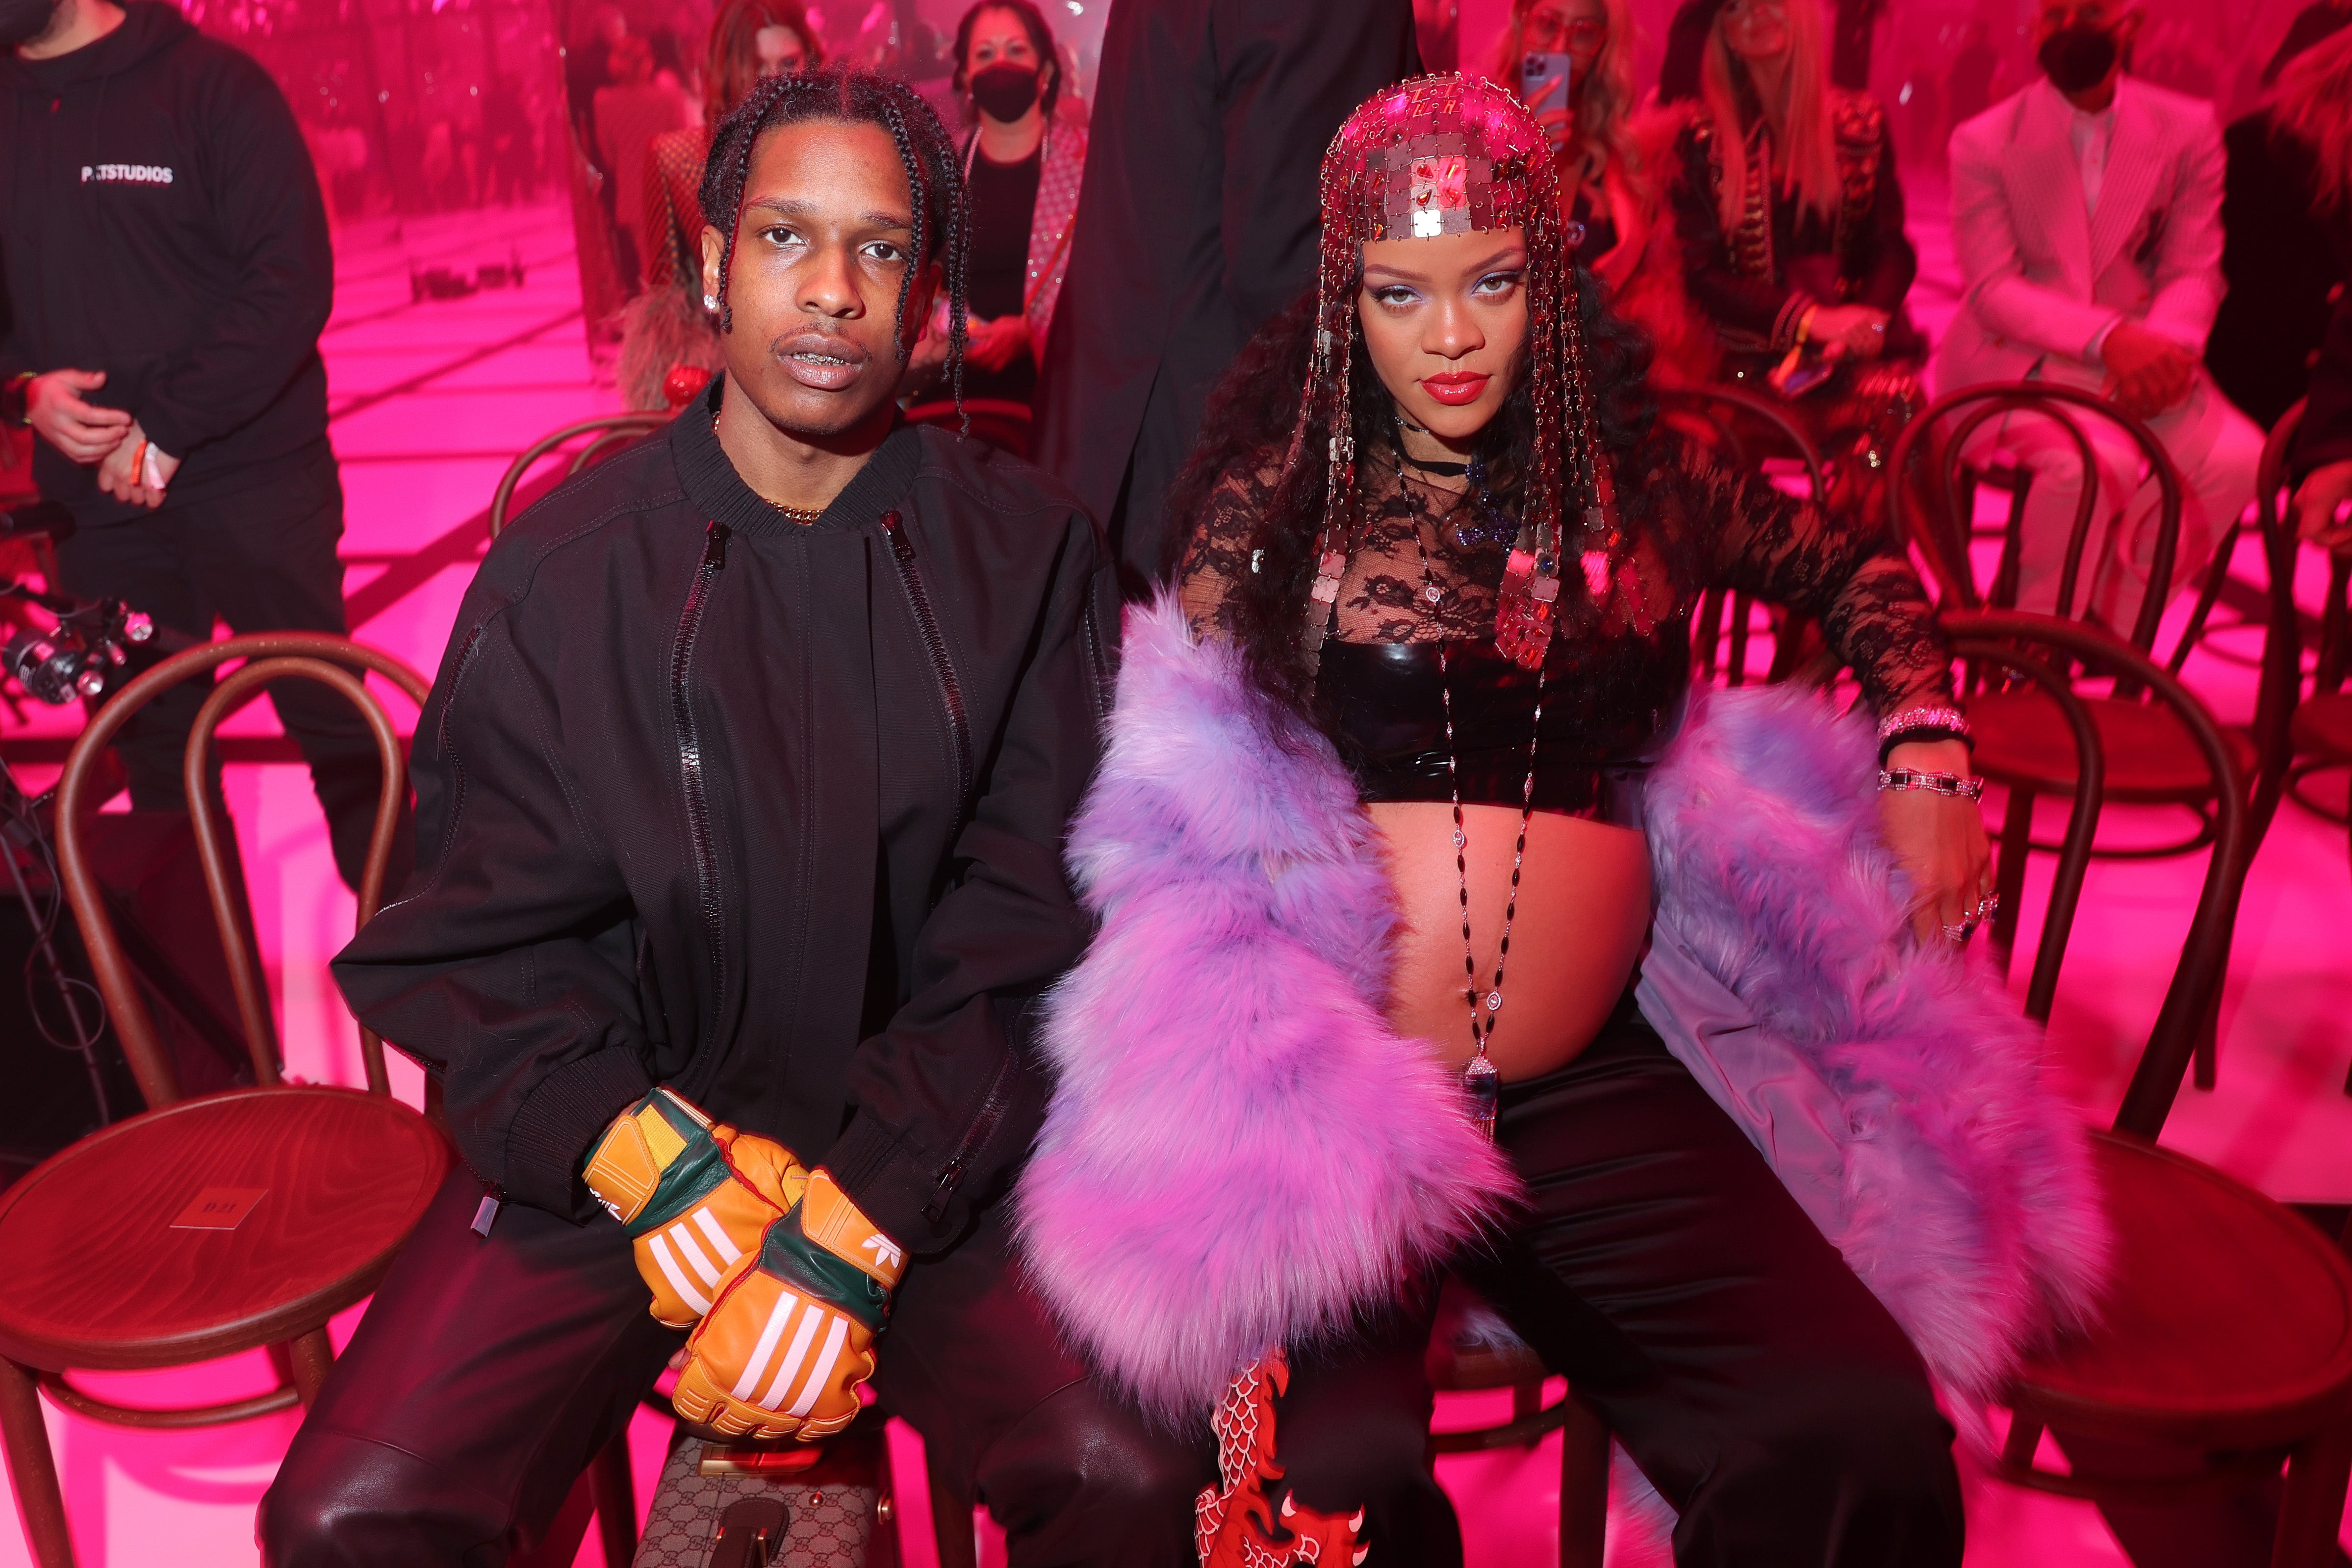 The singer admitted she ‘friend zoned’ A$AP Rocky after meeting ten years ago